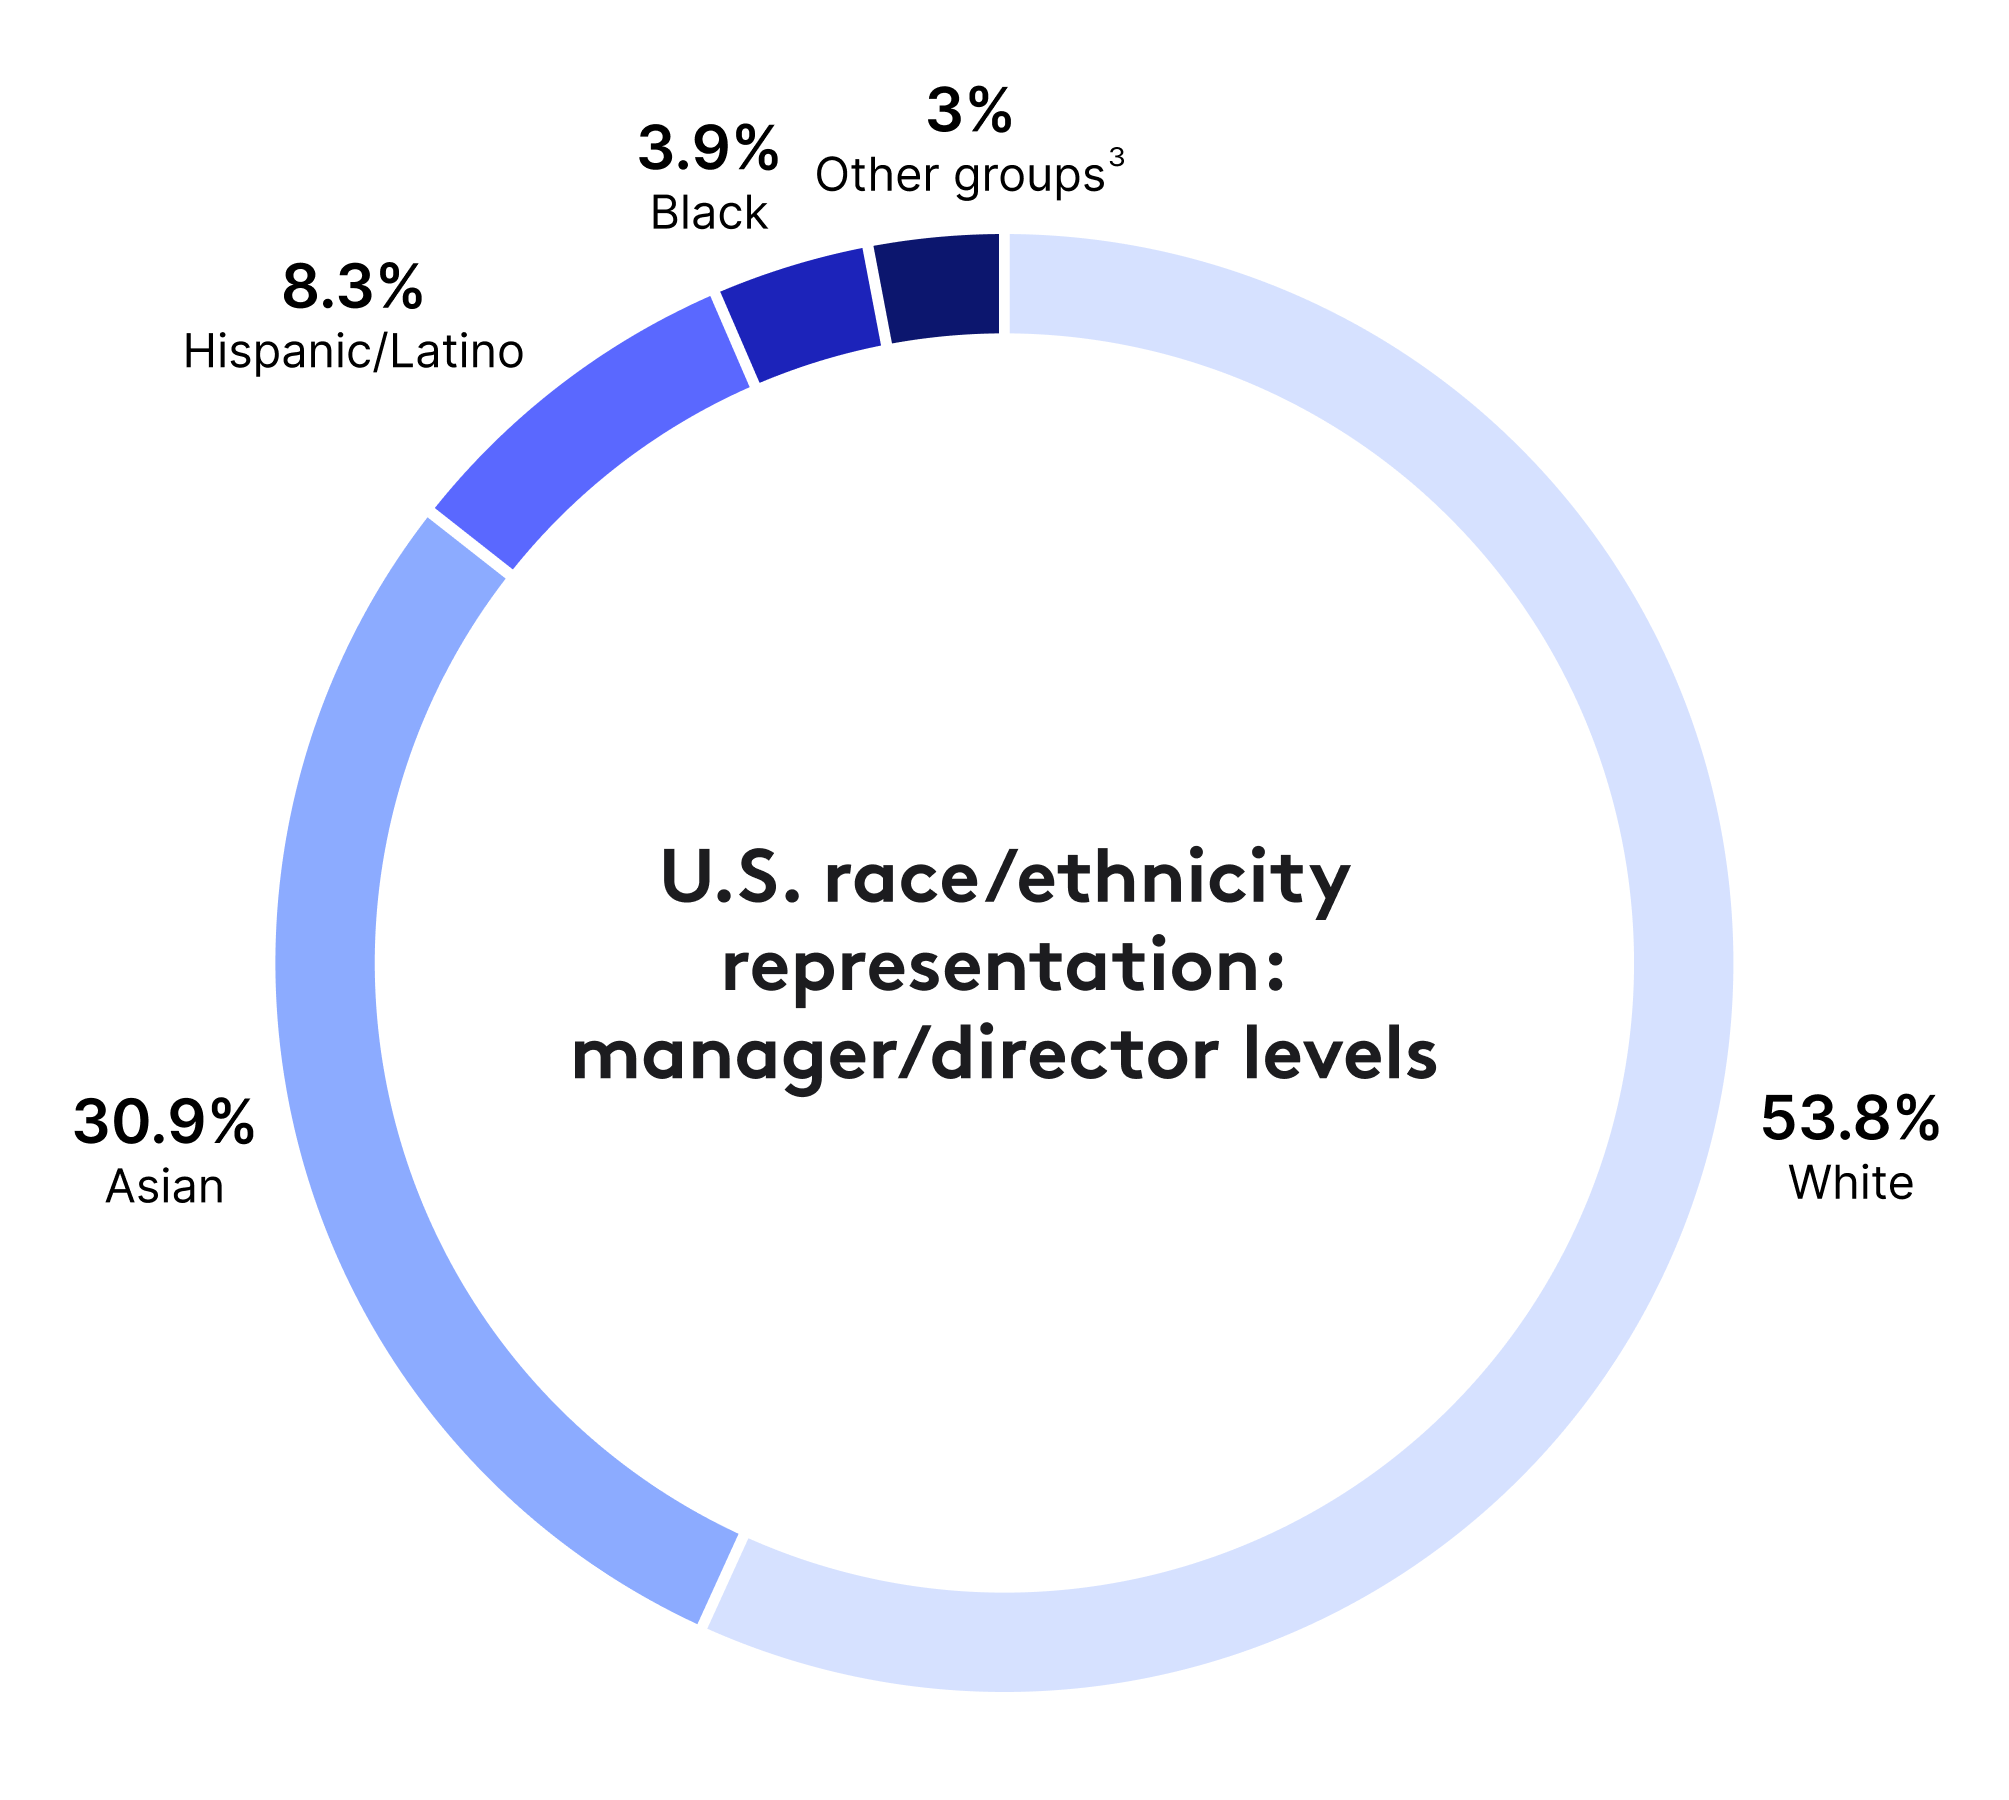 U.S. manager and director staff levels race and ethnicity representation